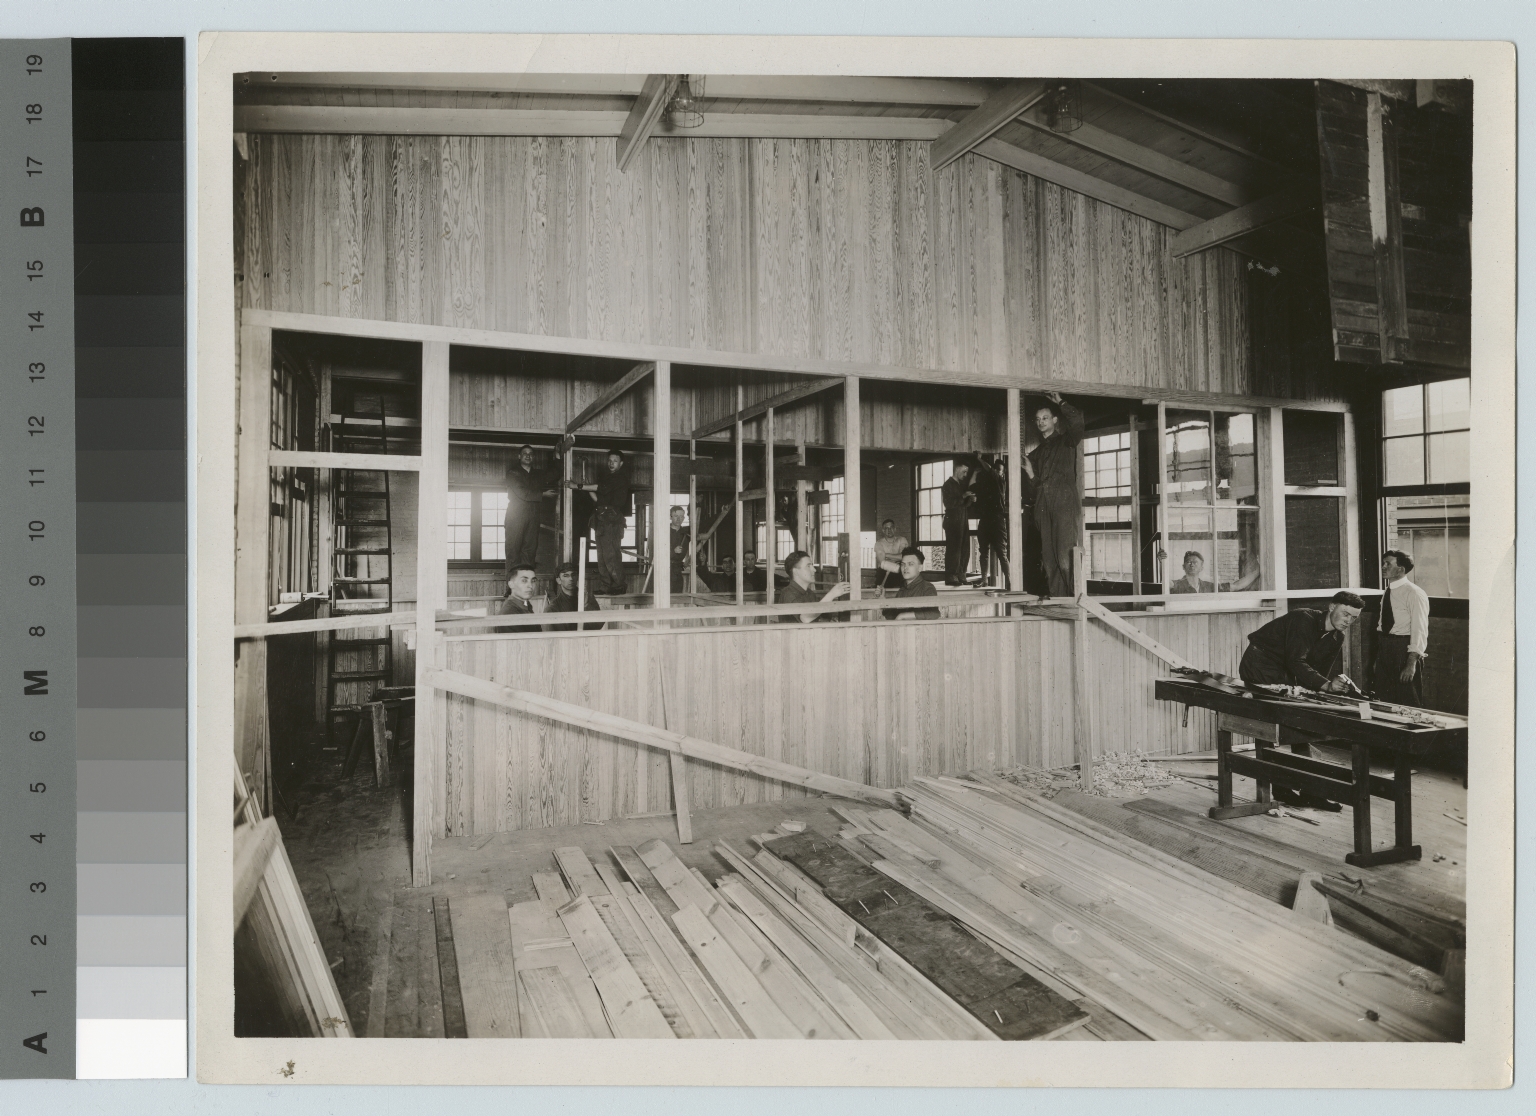 Carpentry students in woodworking shop, Department of Manual Training, Rochester Athenaeum and Mechanics Institute